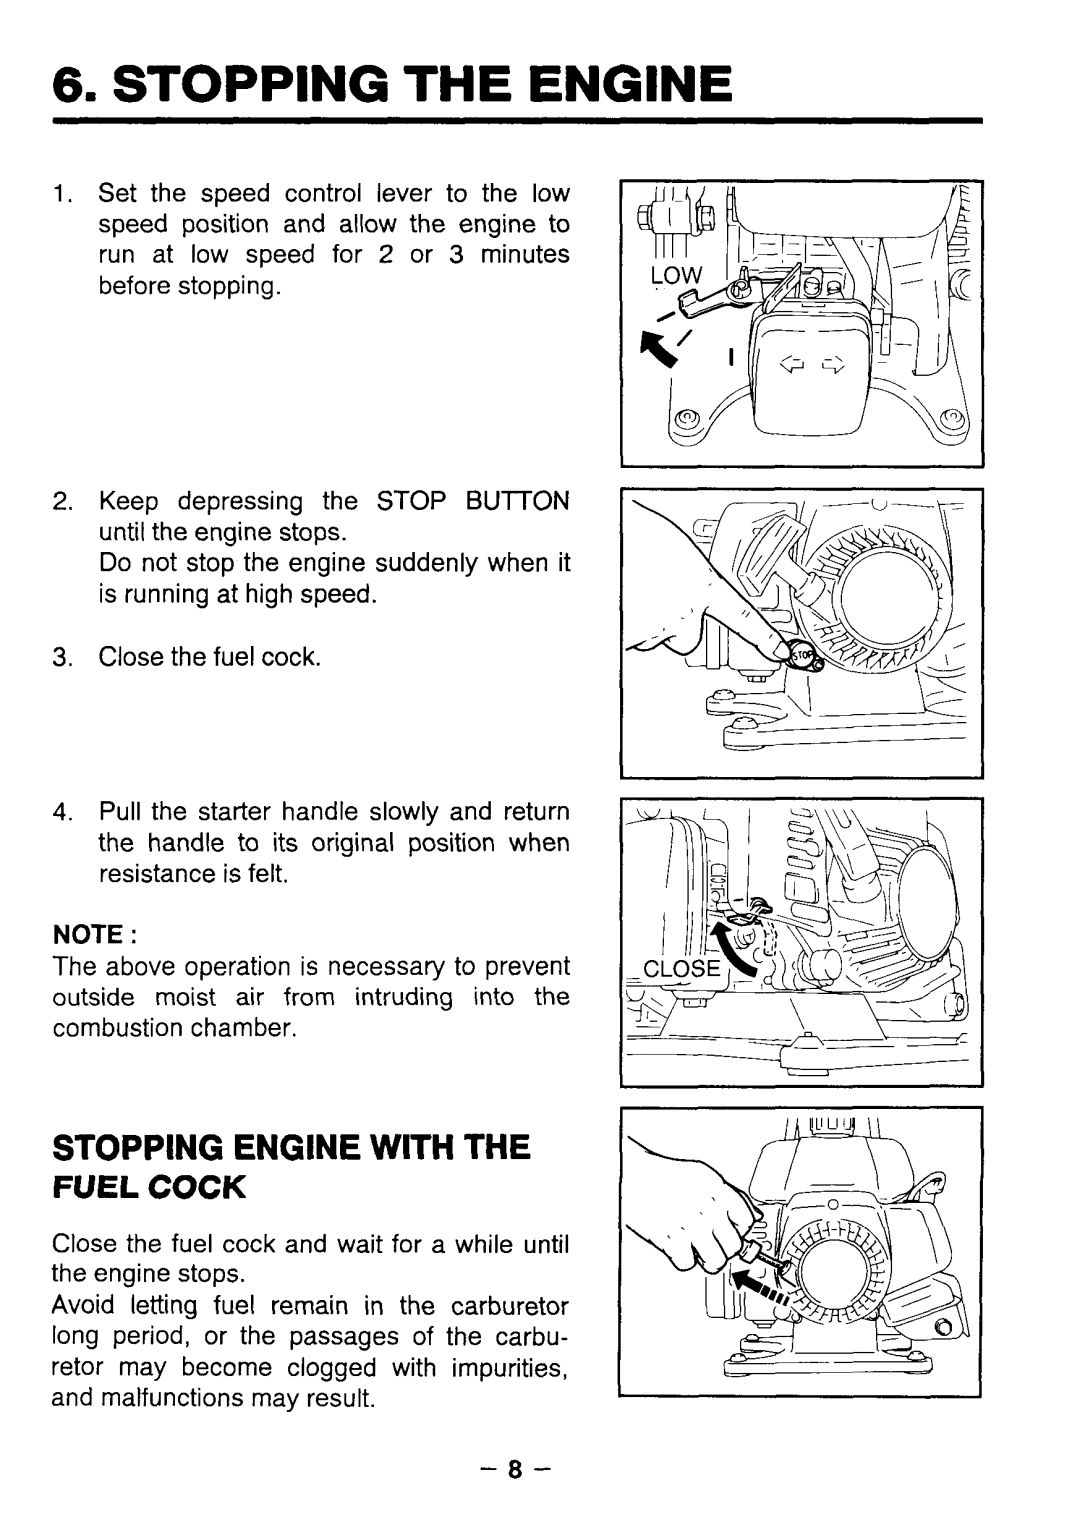 Makita EW1OOR instruction manual Stopping Engine With The, Stopping The Engine, Fuel Cock 